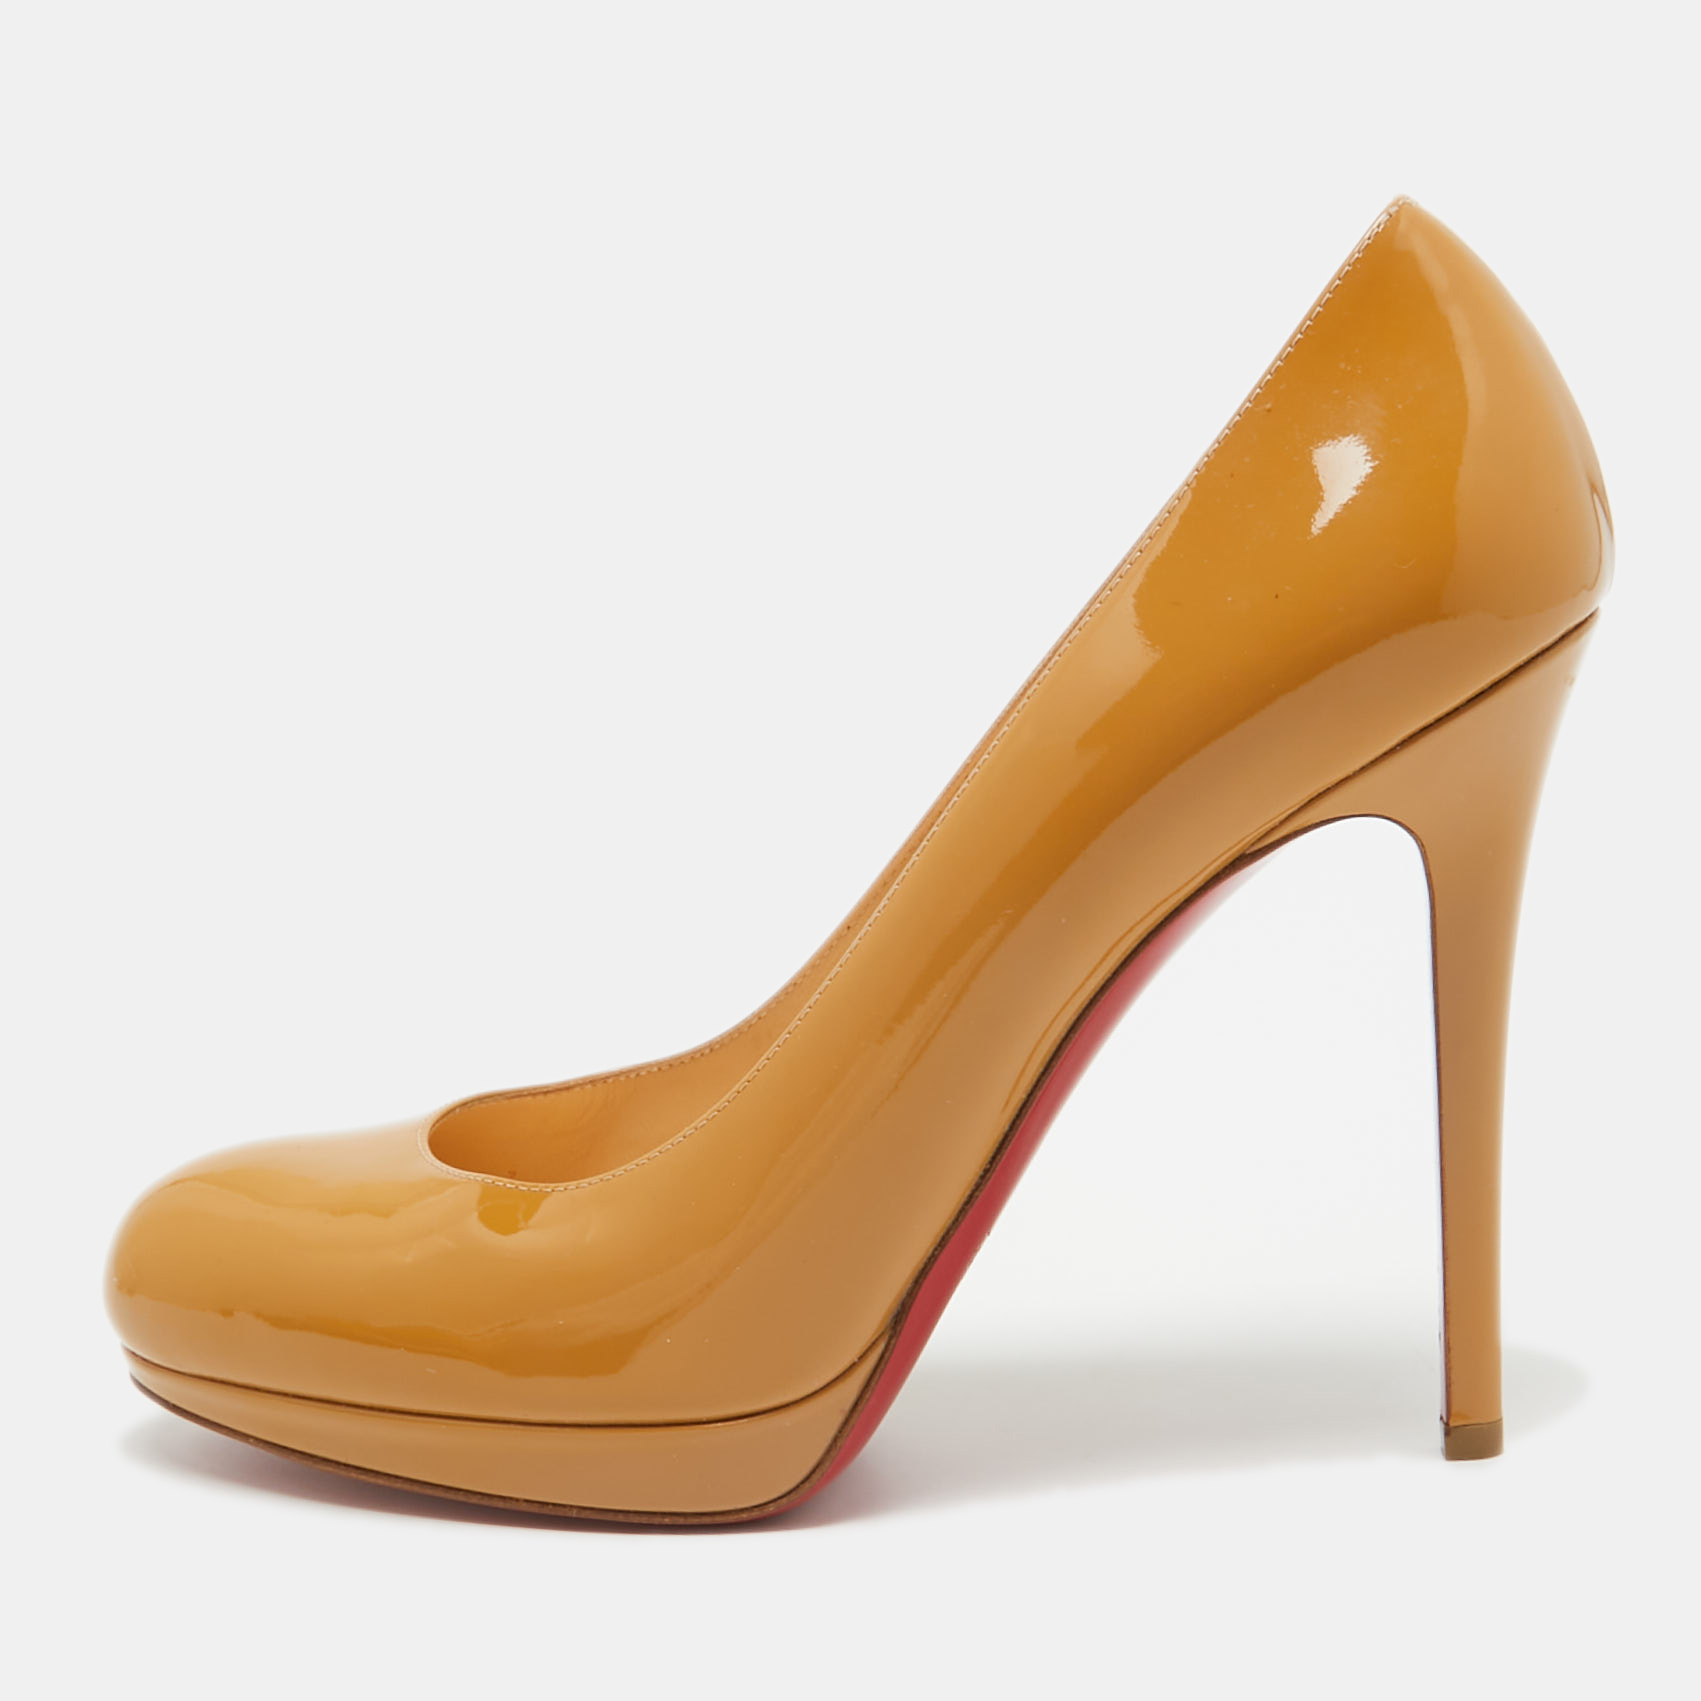 Christian louboutin beige patent leather neofilo pumps size 38.5